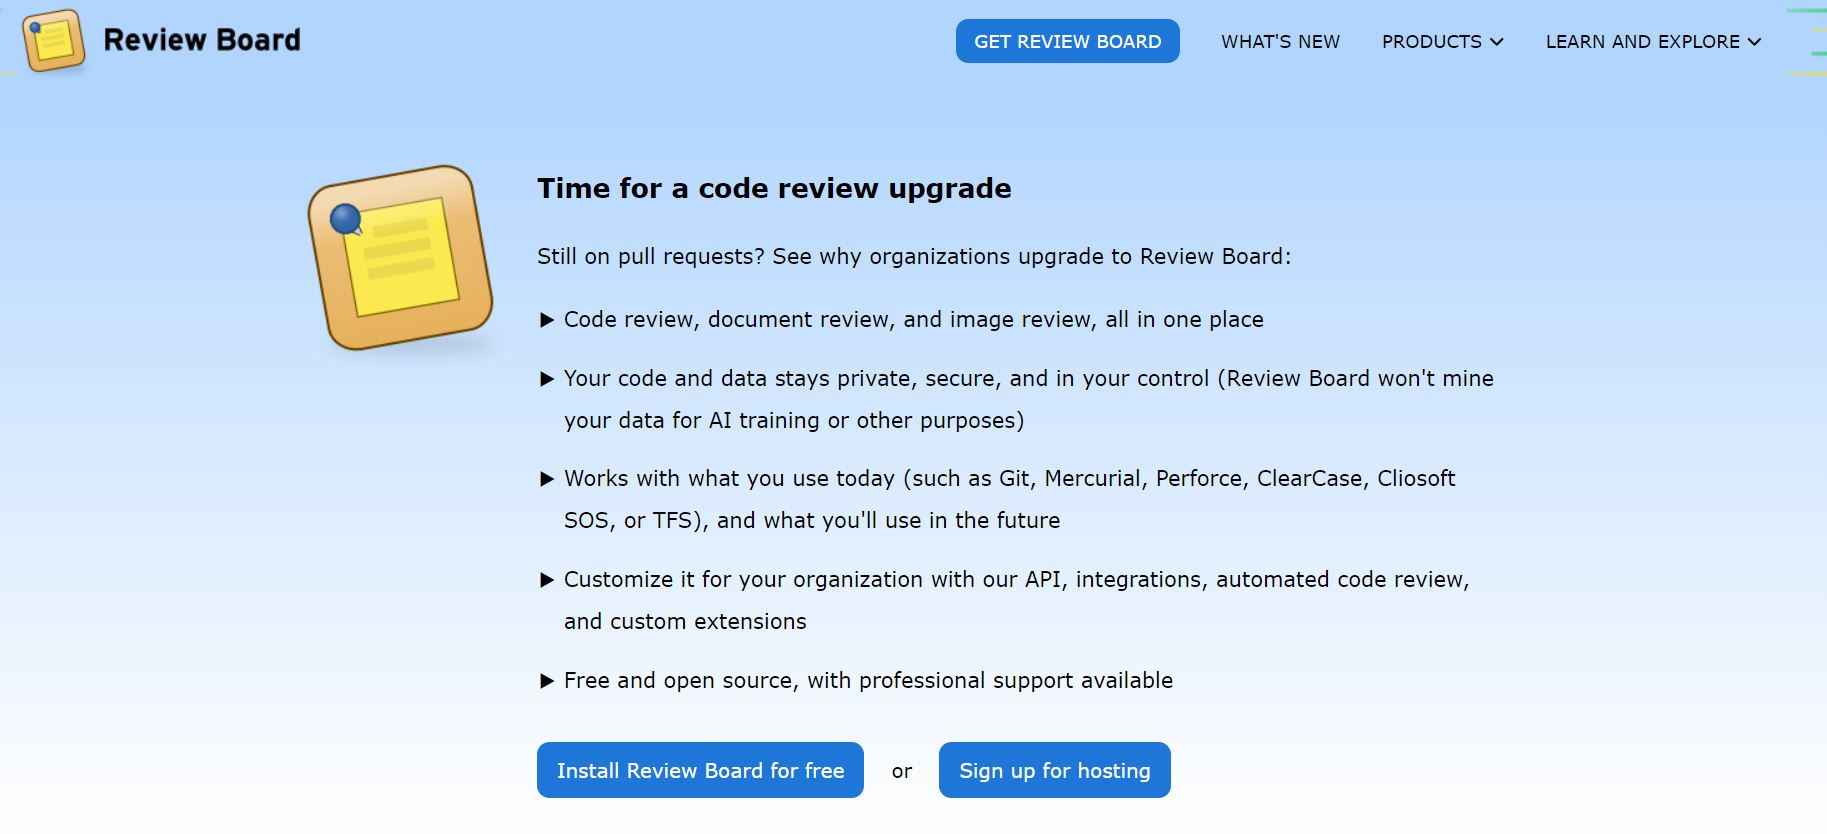 Image of Review Board tool